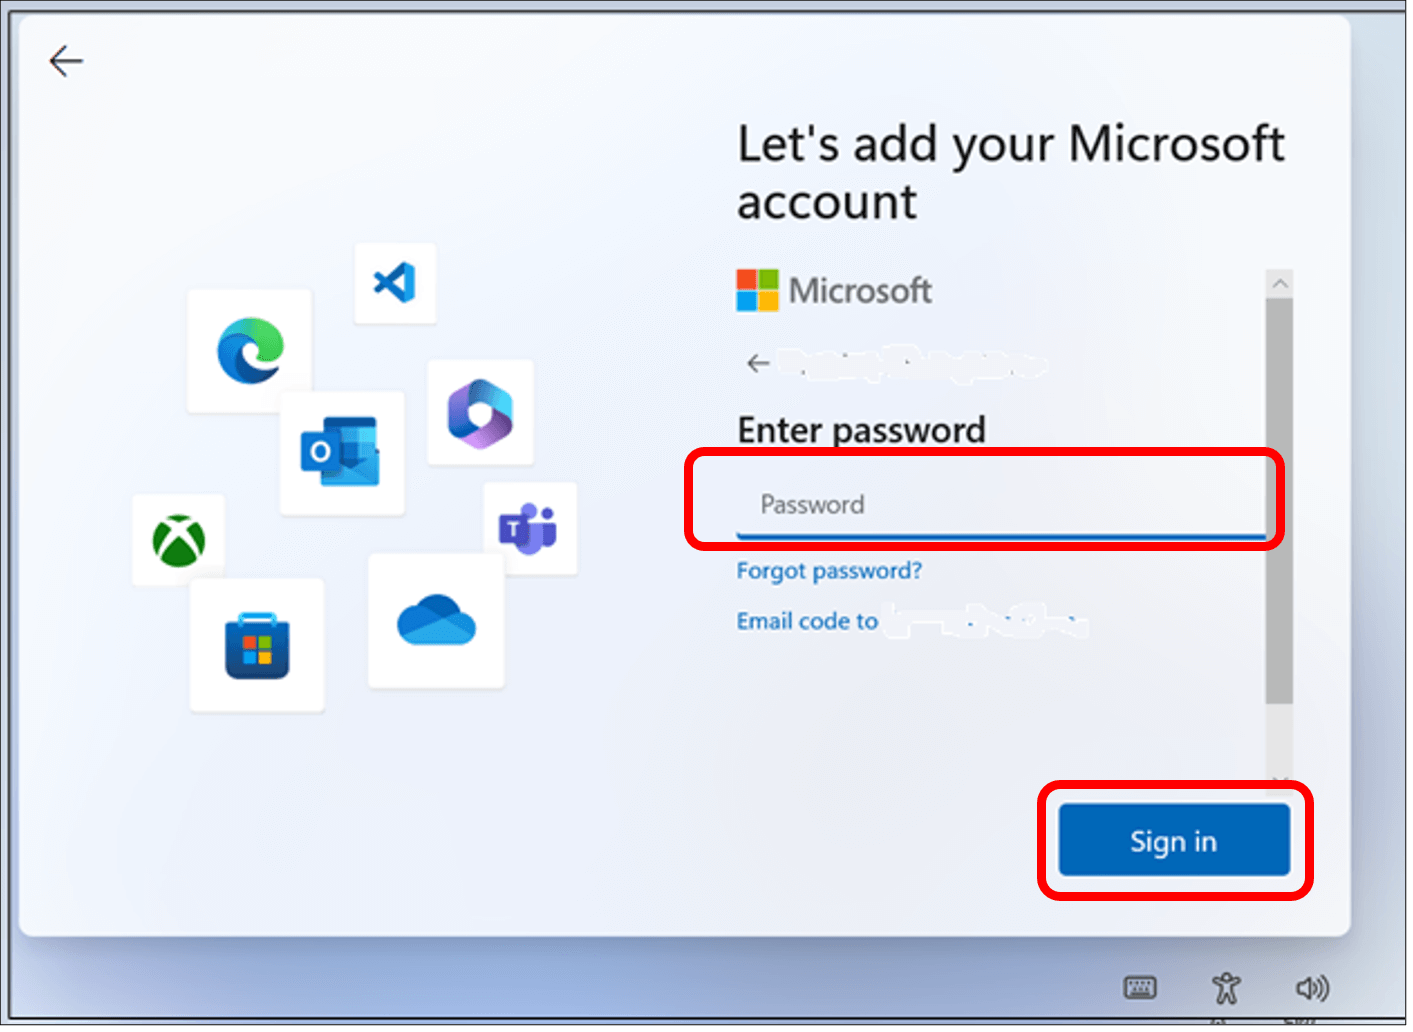 Enter password highlighted to show where to input your email password and Sign in highlighted in bottom right corner to sign into account.